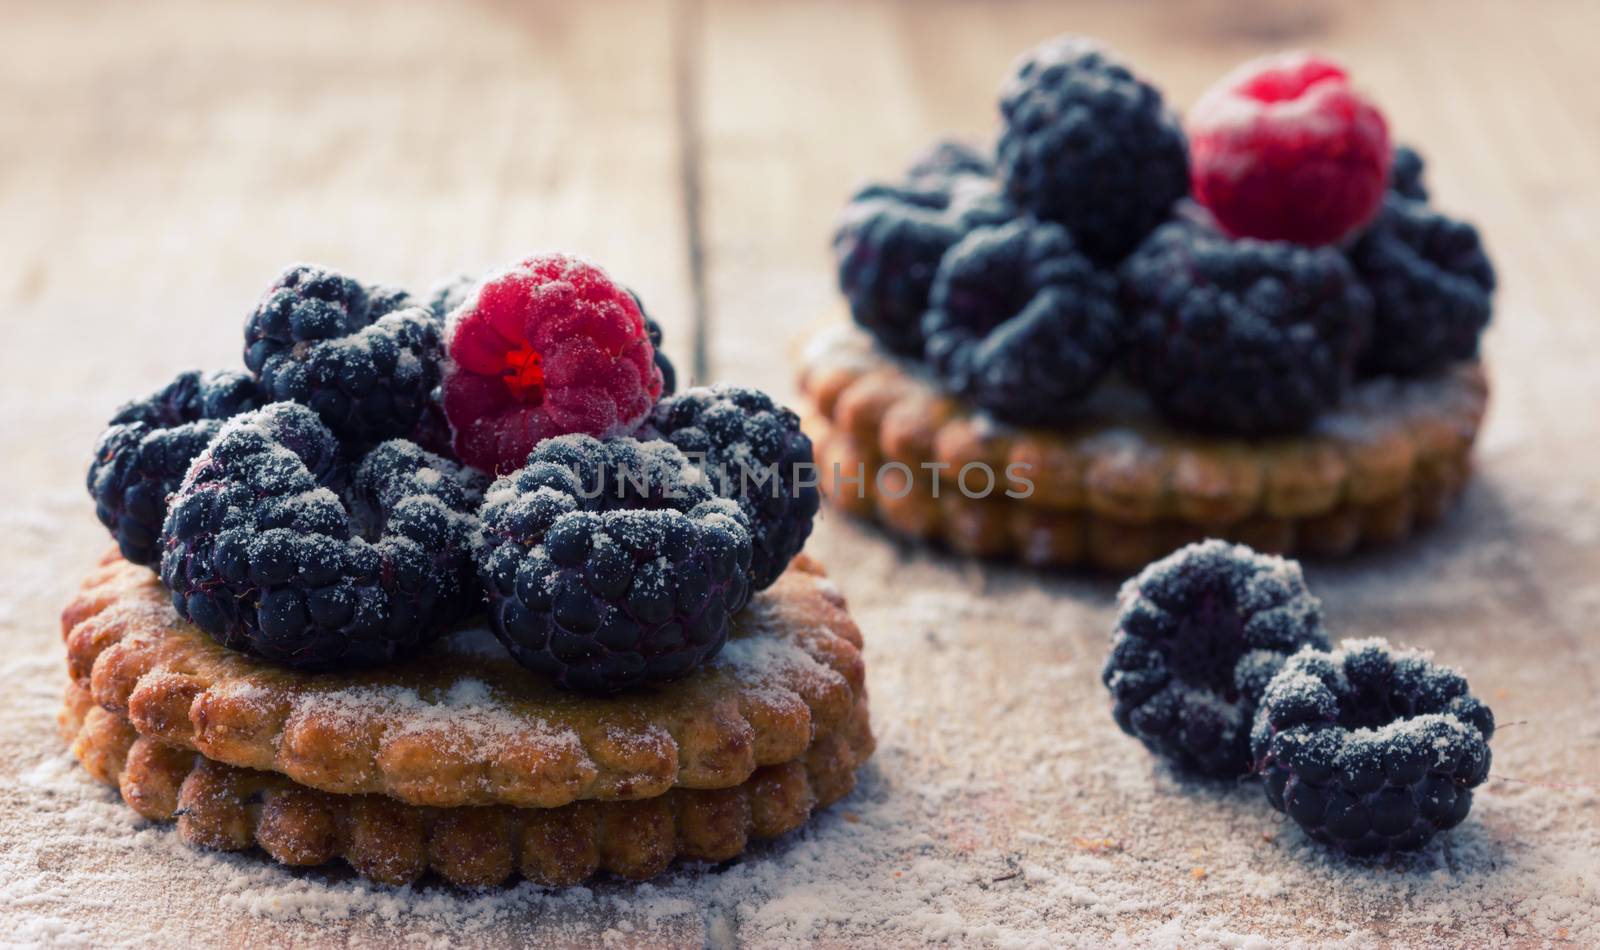 Fresh berry tartlet or cake by liwei12